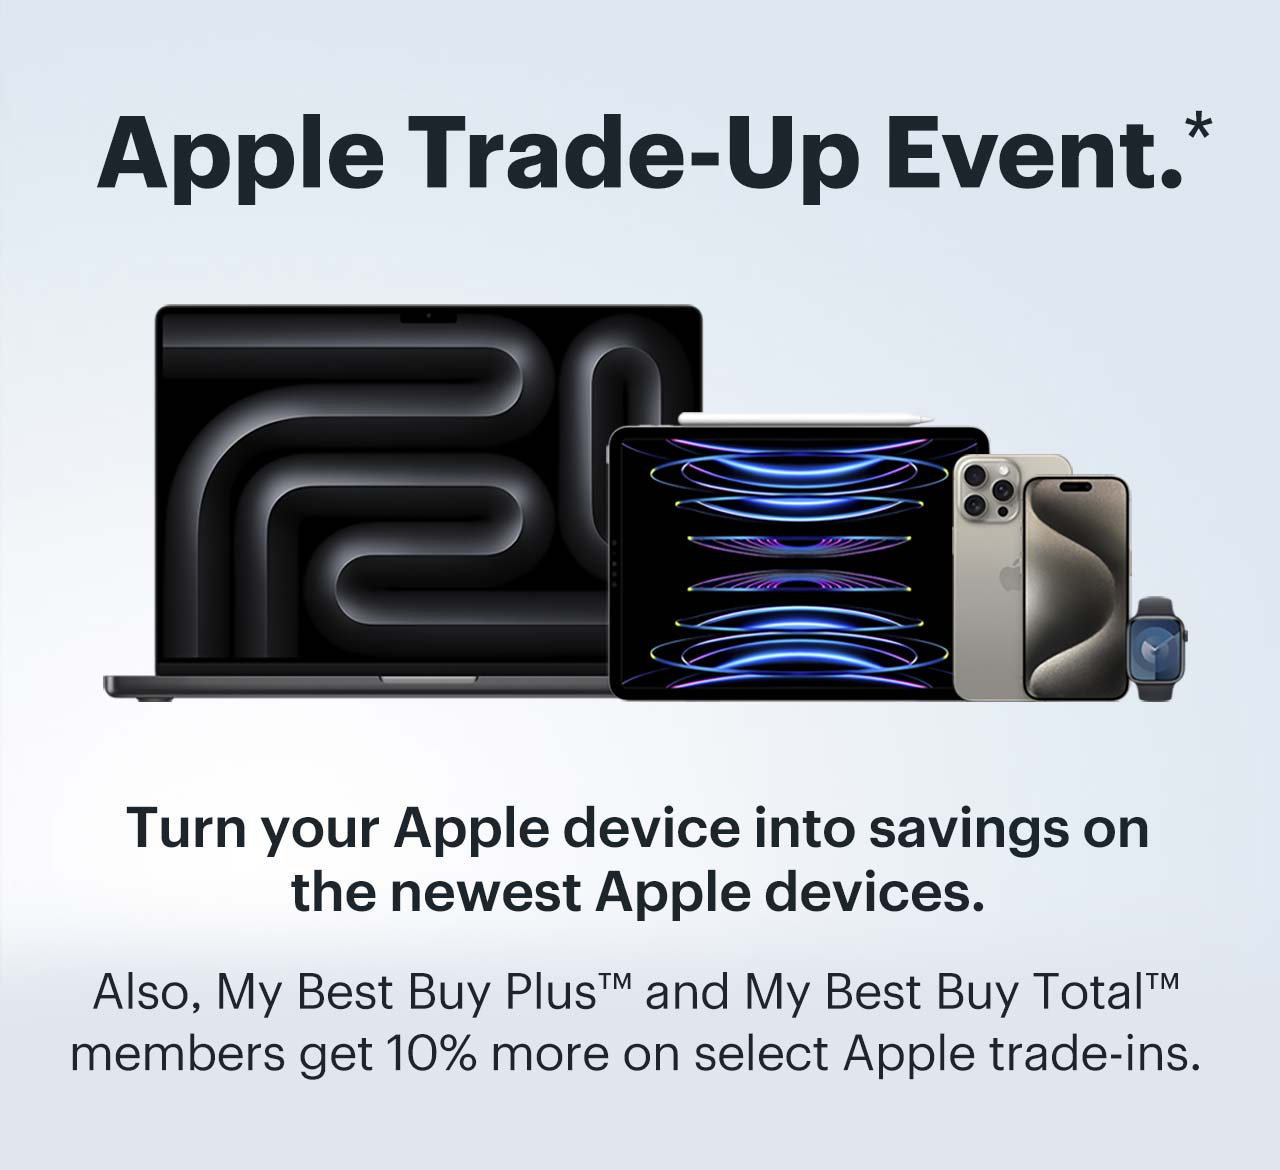 Apple Trade-Up Event. Turn your Apple device into savings on the newest Apple devices. Also, My Best Buy Plus™ and My Best Buy Total™ members get 10% more on select Apple trade-ins. Shop now. Reference disclaimer.